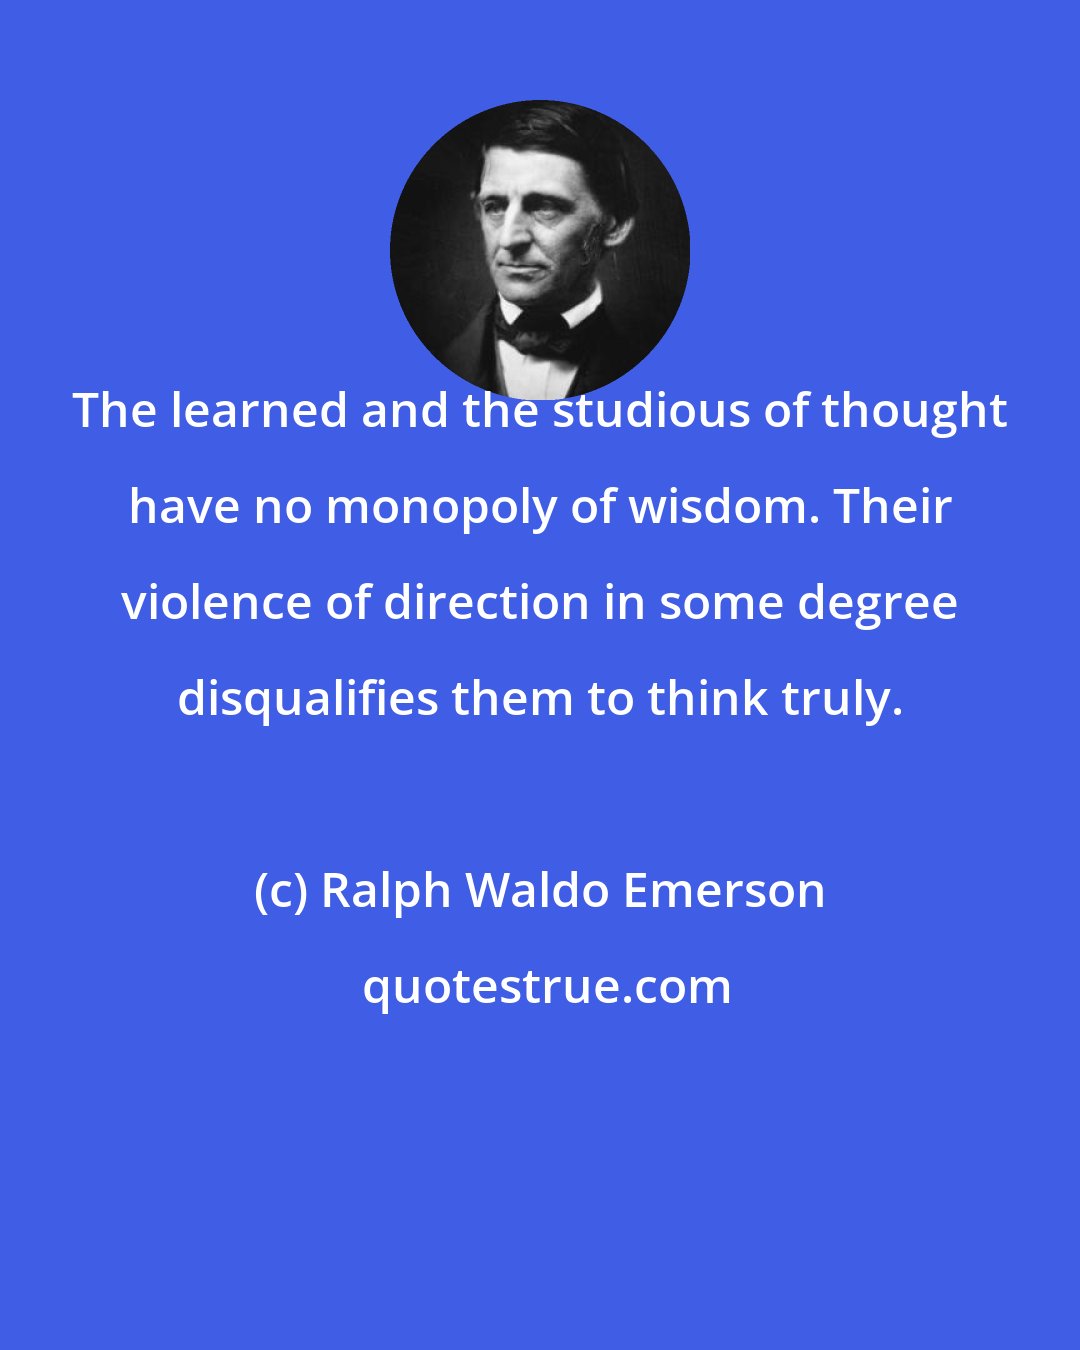 Ralph Waldo Emerson: The learned and the studious of thought have no monopoly of wisdom. Their violence of direction in some degree disqualifies them to think truly.